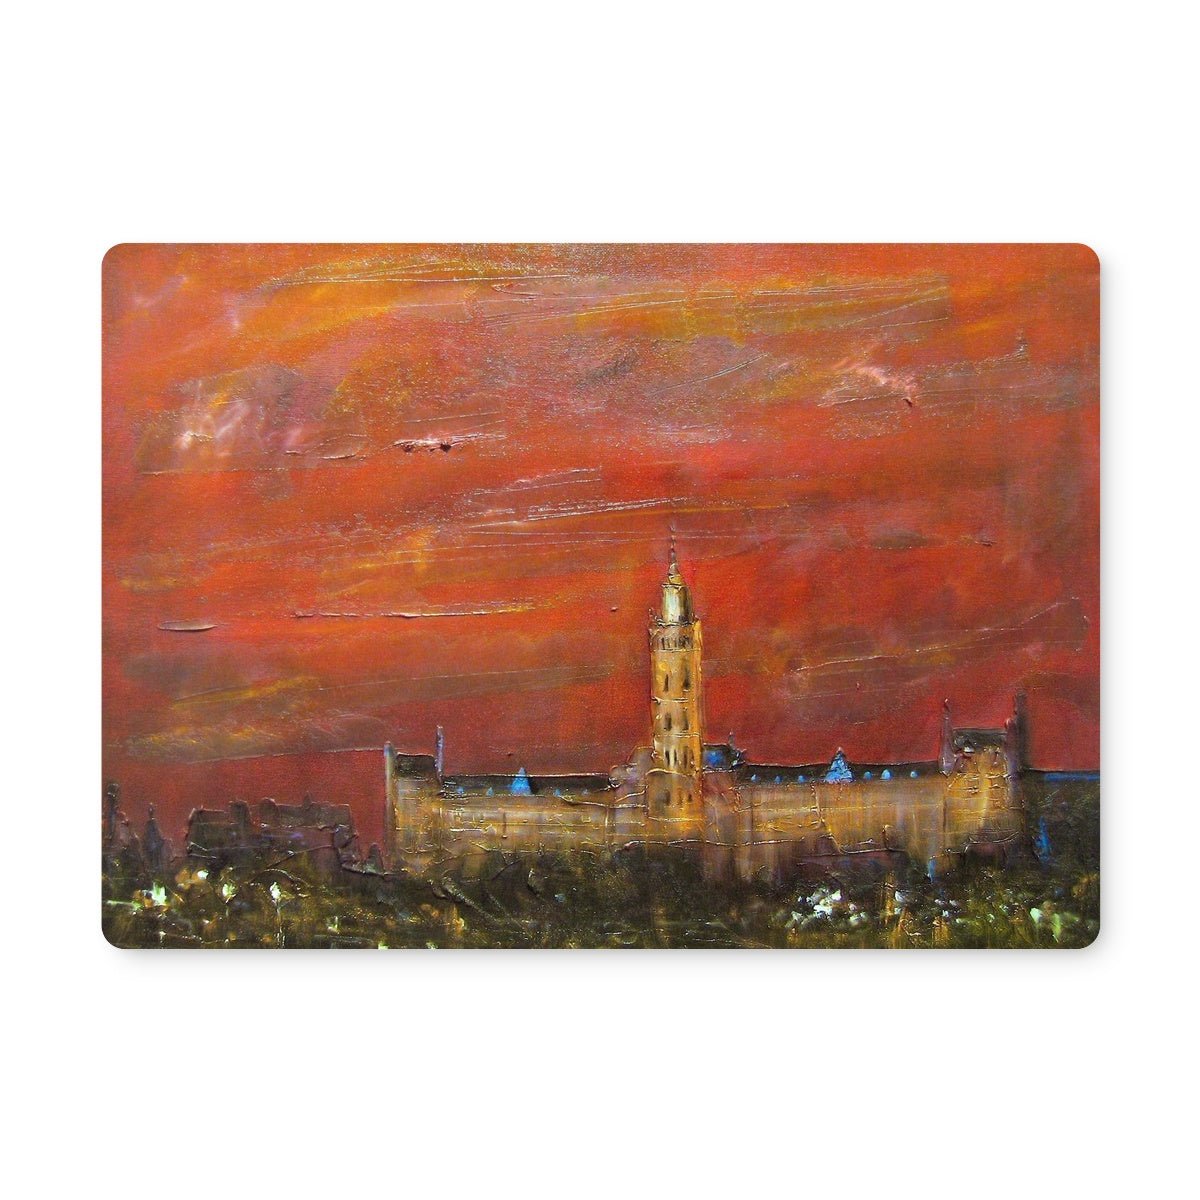 Glasgow University Dusk Art Gifts Placemat-Placemats-Edinburgh & Glasgow Art Gallery-6 Placemats-Paintings, Prints, Homeware, Art Gifts From Scotland By Scottish Artist Kevin Hunter